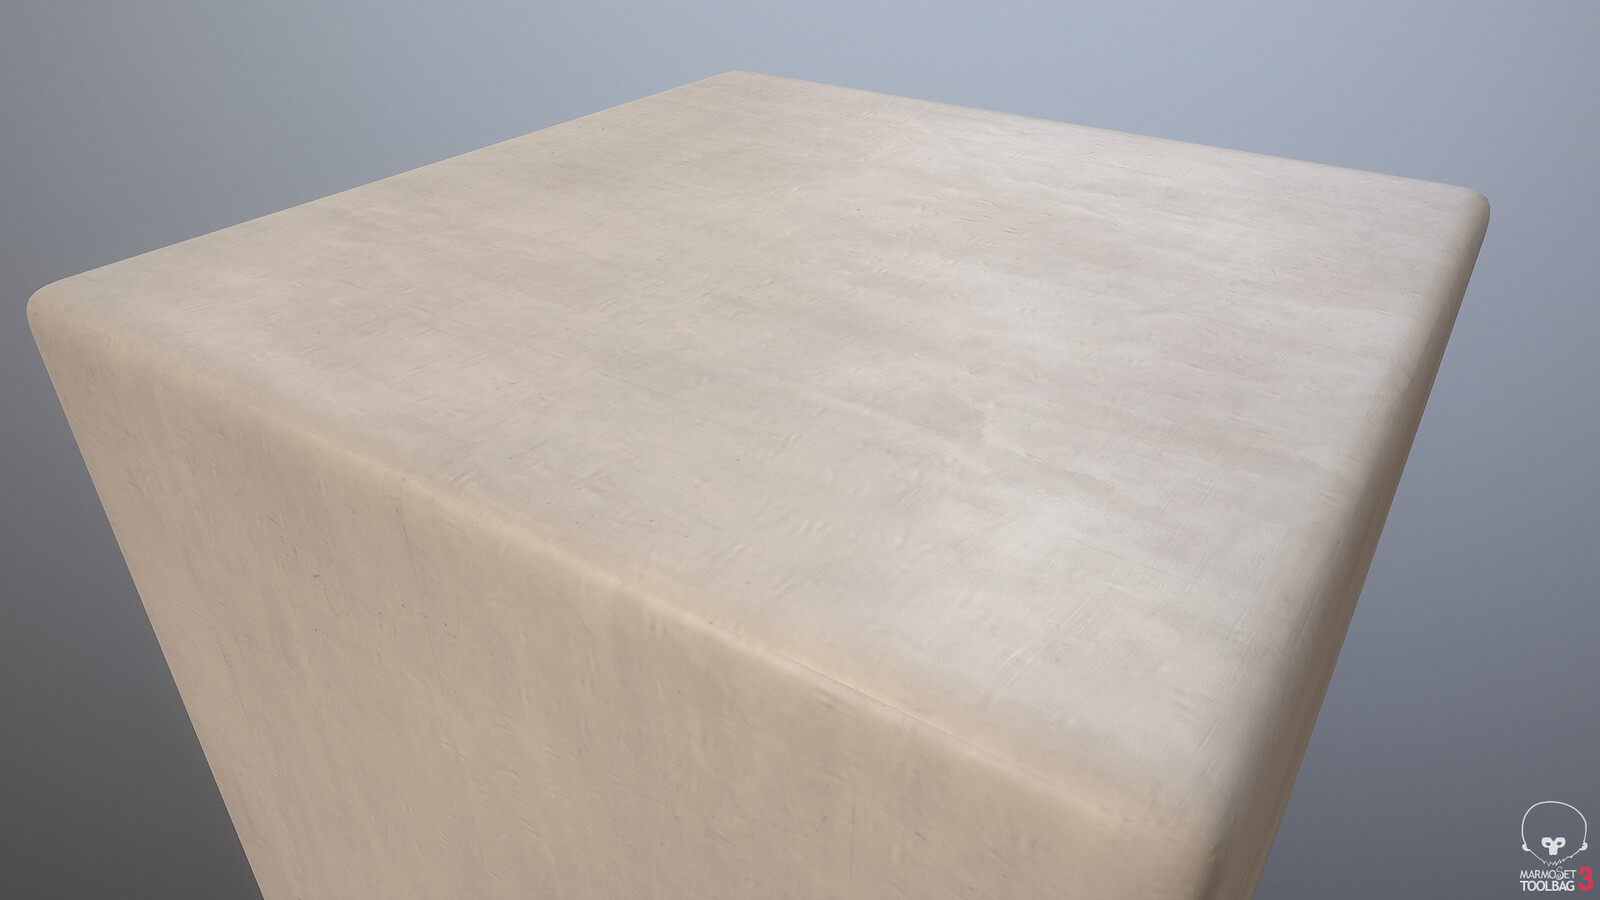 This is a basic plaster texture that I'll be using for the walls.